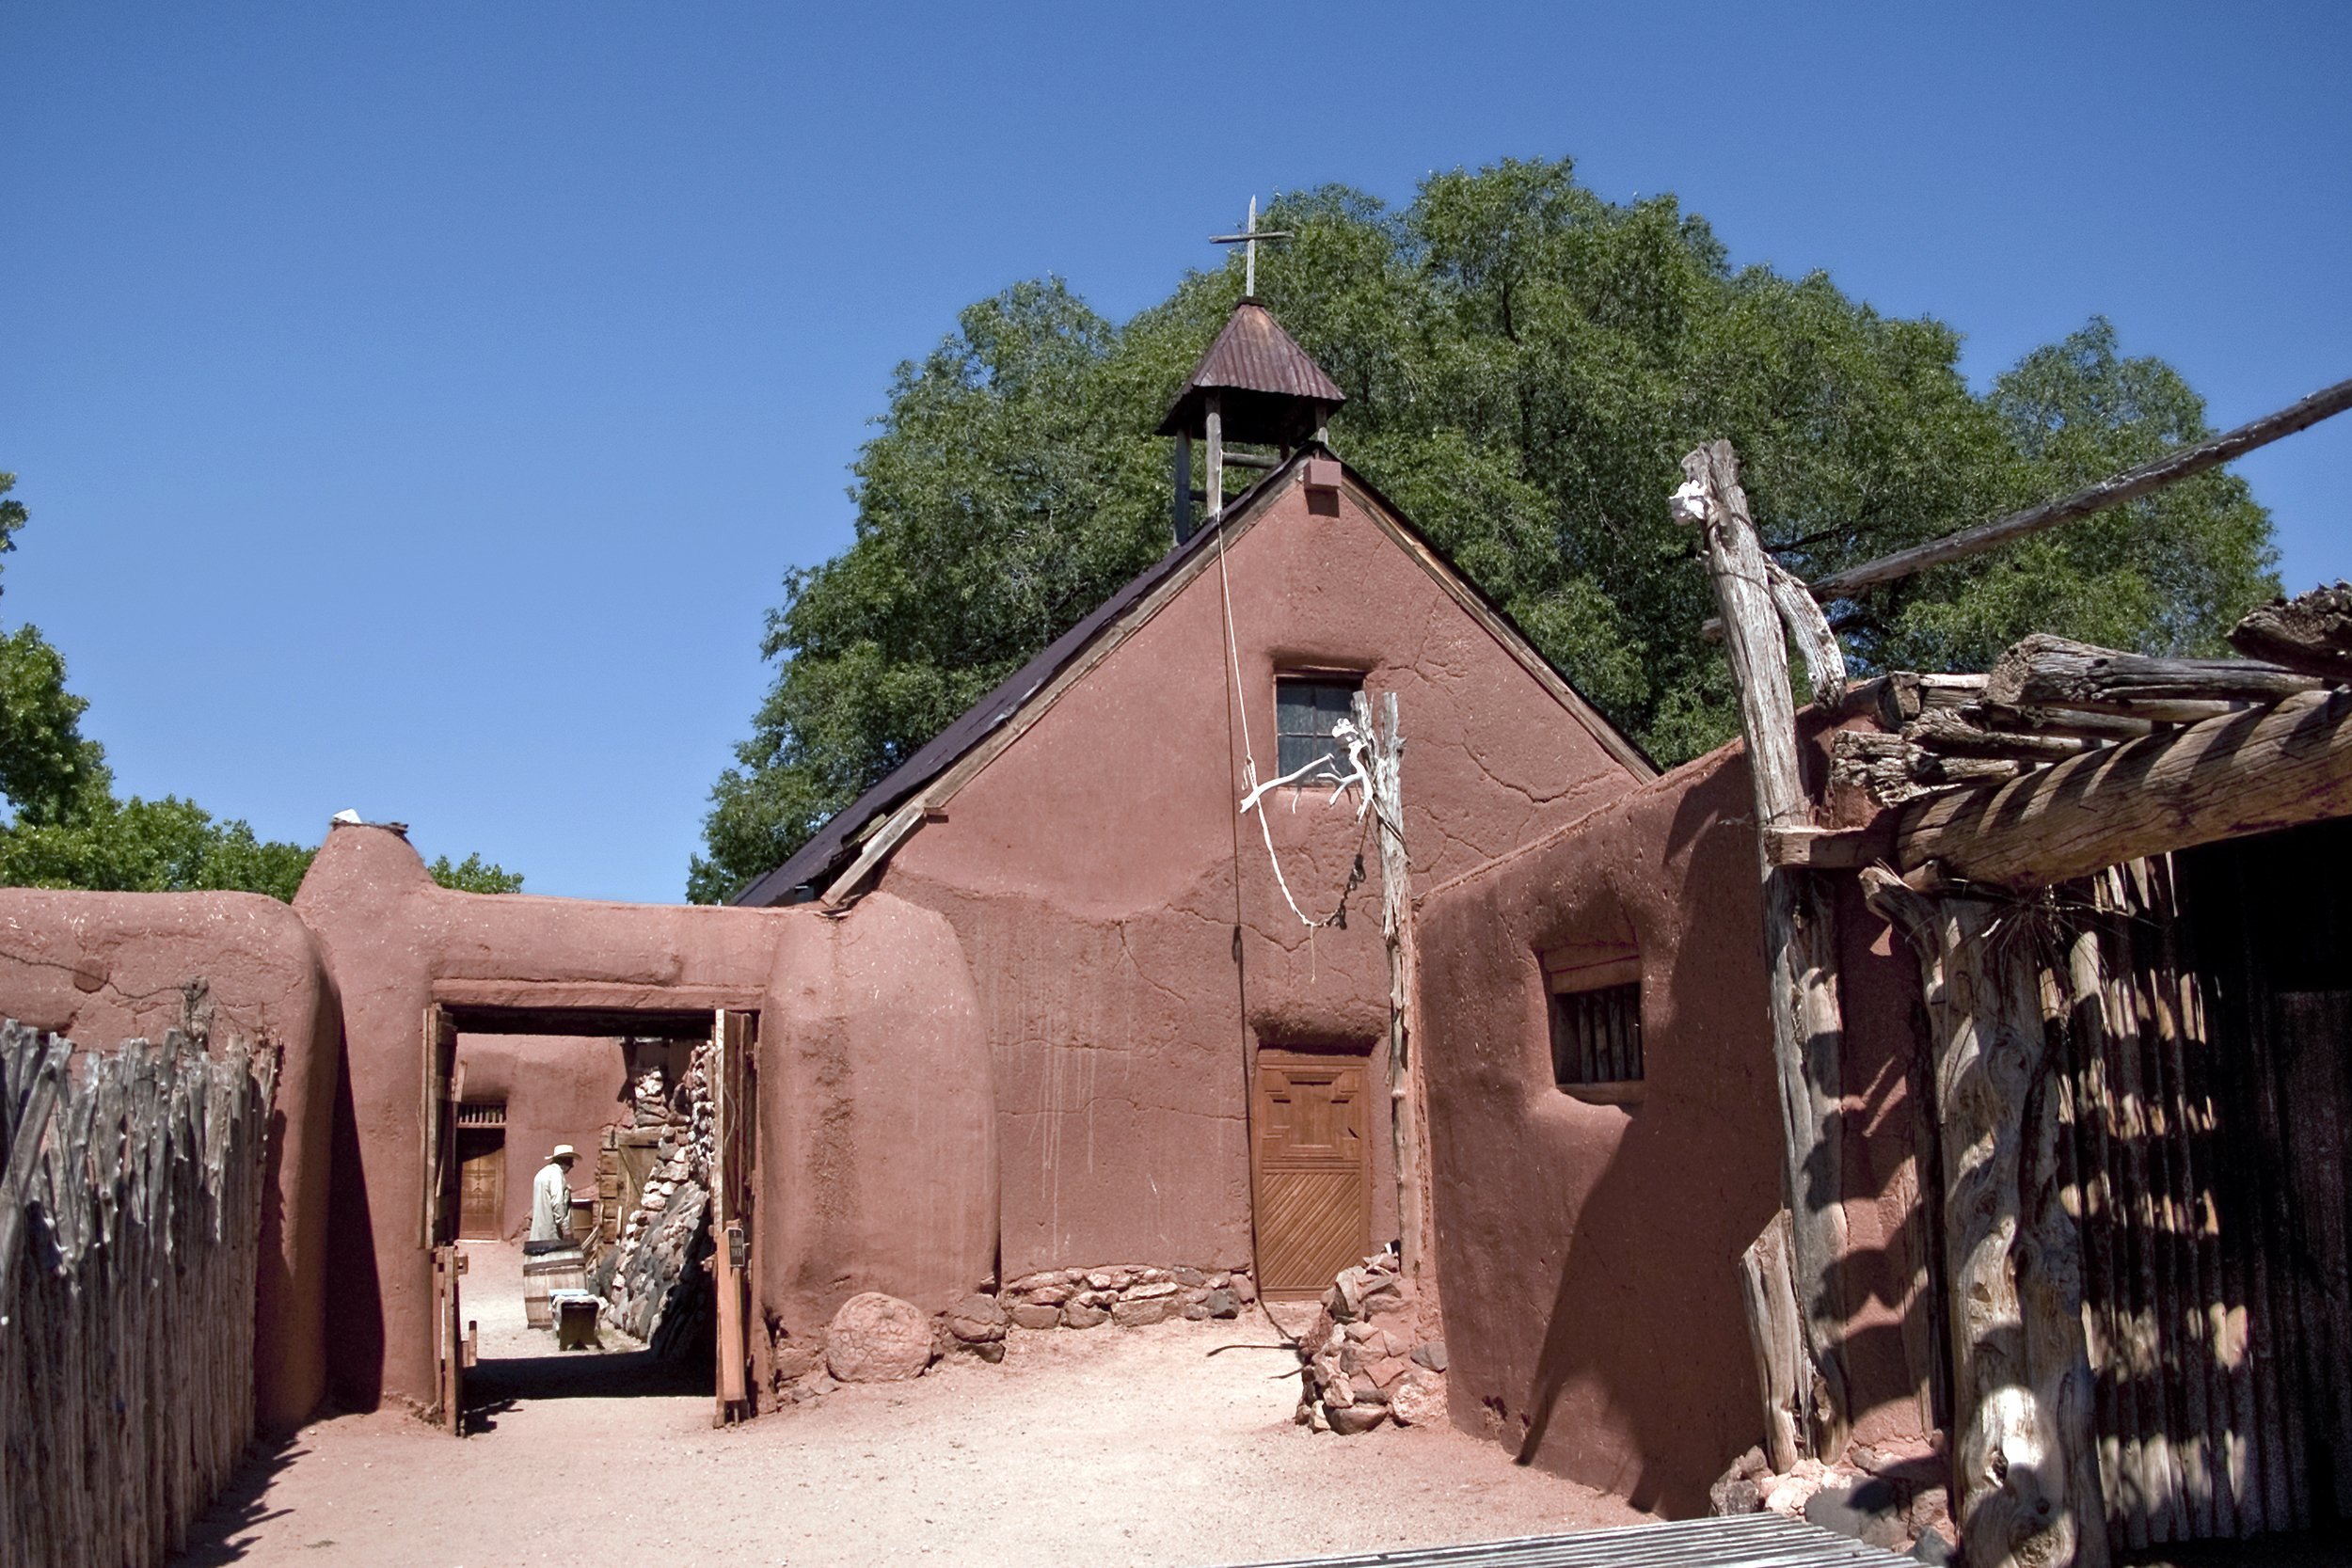 <p><strong>Location:</strong> Santa Fe, New Mexico <br><strong>Era:</strong> 1700s-1800s <br><strong>What to do:</strong> This picturesque living history museum includes original colonial buildings that have been reconstructed. Craftspeople showcase <a href="https://golondrinas.org">traditional New Mexican weaving</a> and colcha embroidery on most days, and several festivals take over the 200-acre grounds throughout the year to celebrate local food, wine, and history. Note: Due to staffing shortages, tour reservations are on hold until June. <br><strong>Cost:</strong> $6 for ages 19 and up; $4 for ages 13 to 17 and seniors 62 and older (higher prices for festivals)</p>